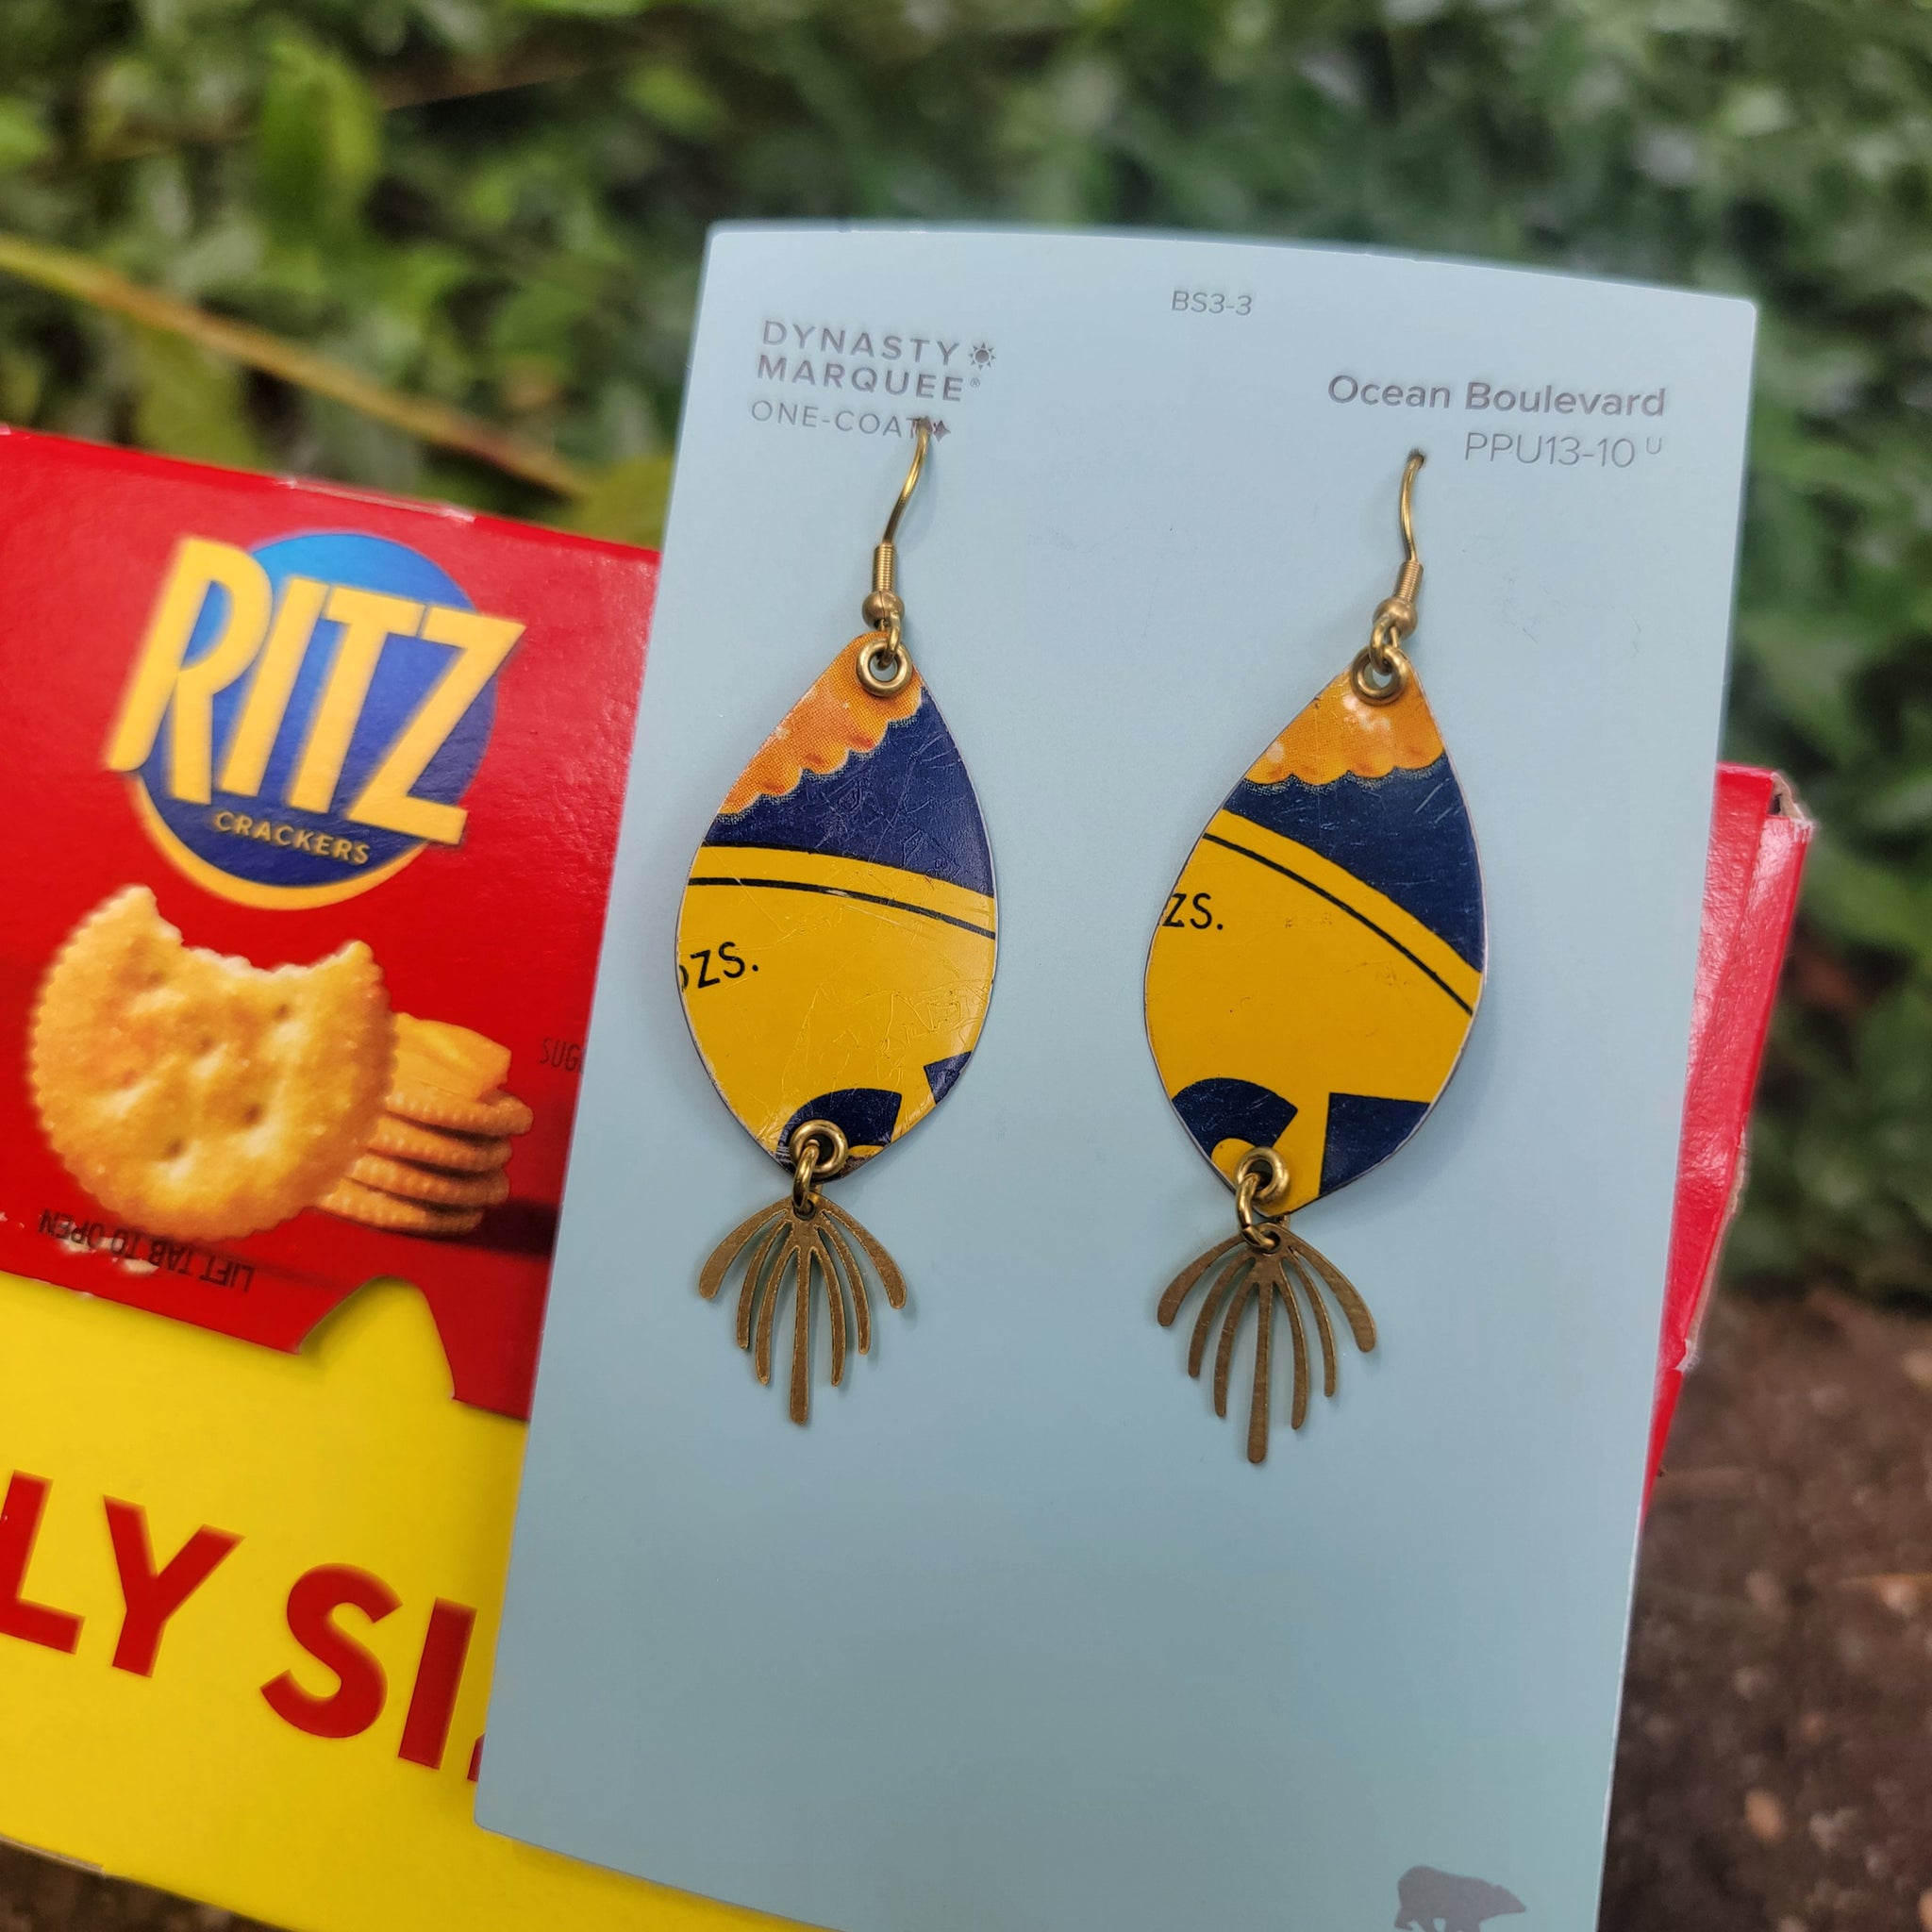 Cheese & Crackers Ritz Collection - Repurposed Vintage Tin Earrings